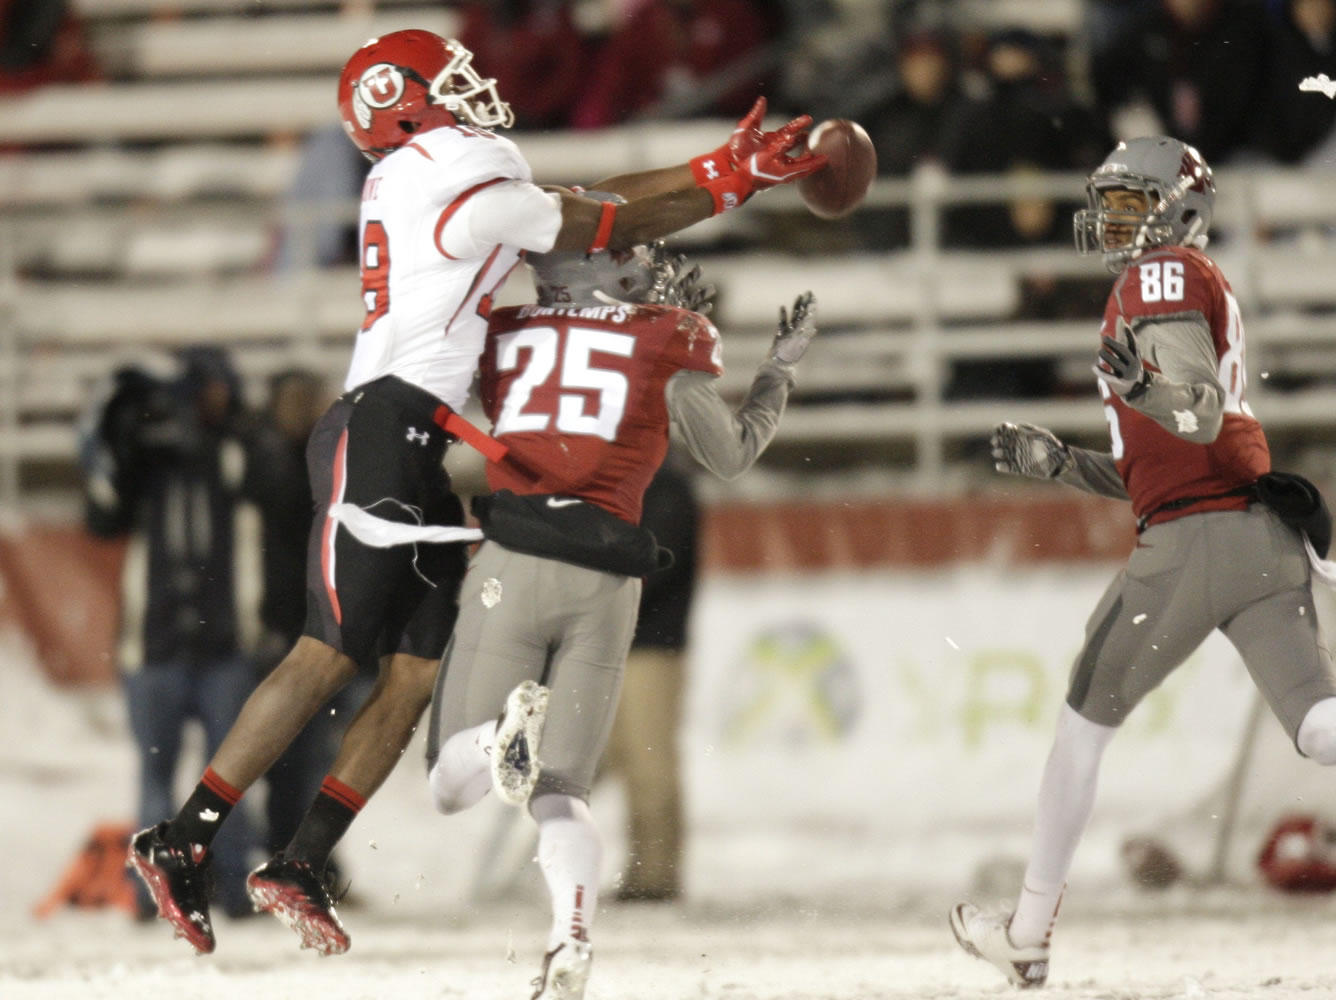 Utah defensive back Eric Rowe breaks up a pass intended for Washington State's Bennett Bontemps (25) during a snowy second half in Pullman on Saturday.